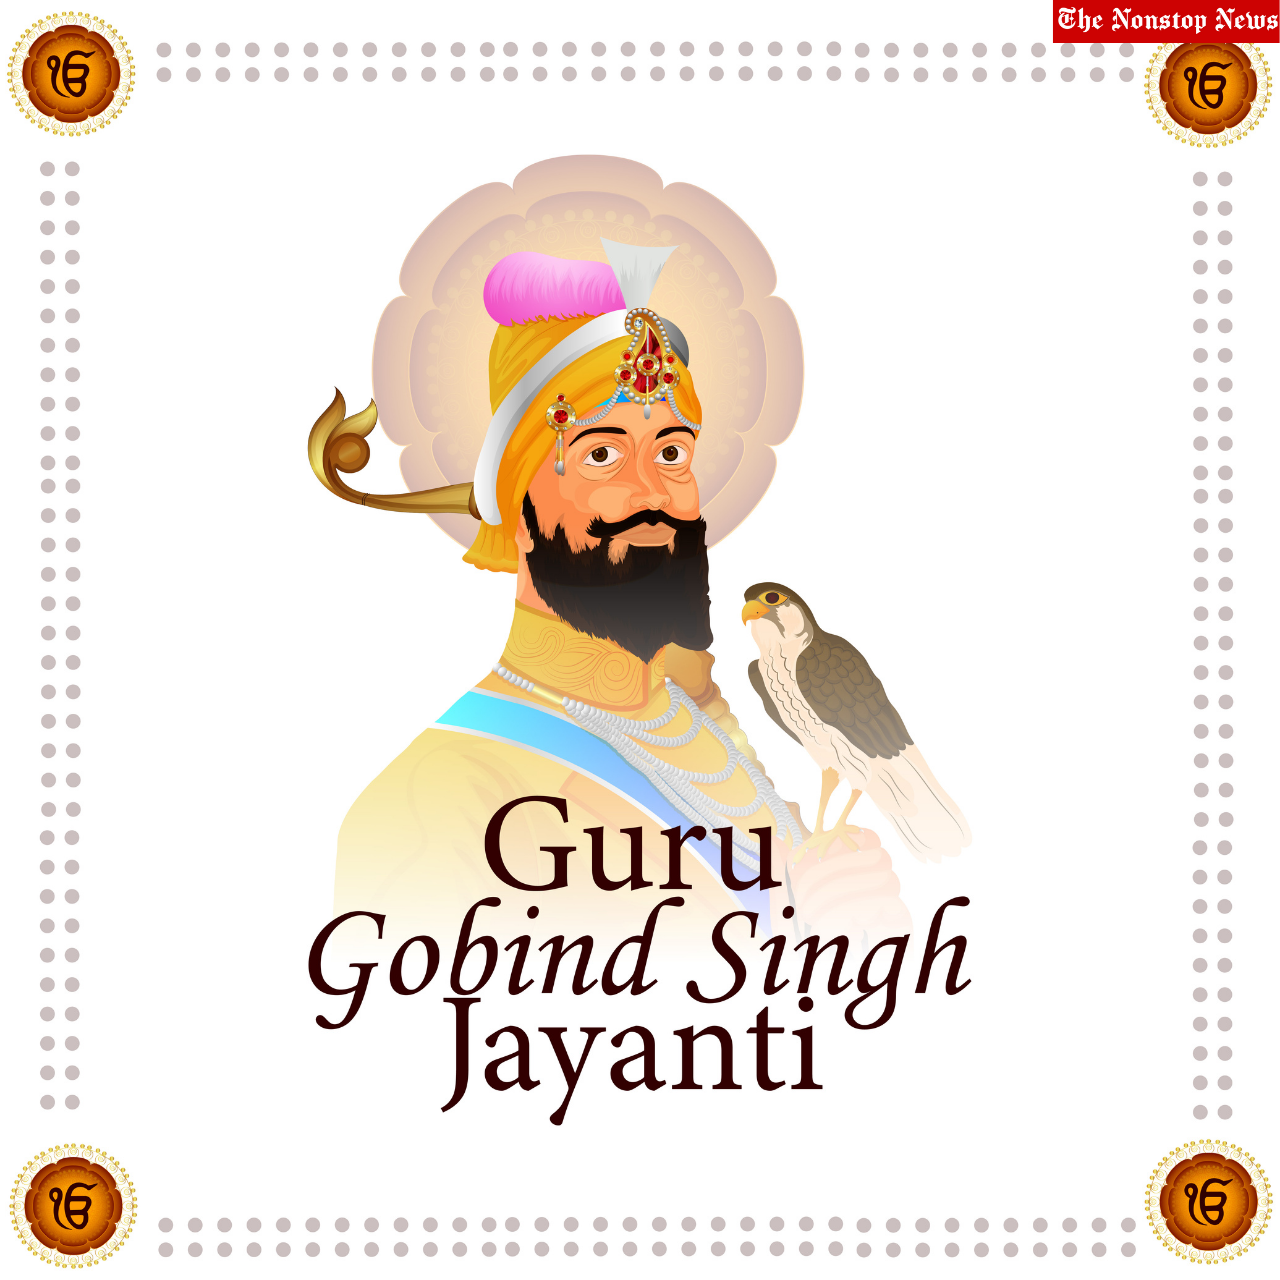 Guru Gobind Singh Jayanti 2022 Date, History, Significance, Celebration, and everything you need to know about Guru Parv